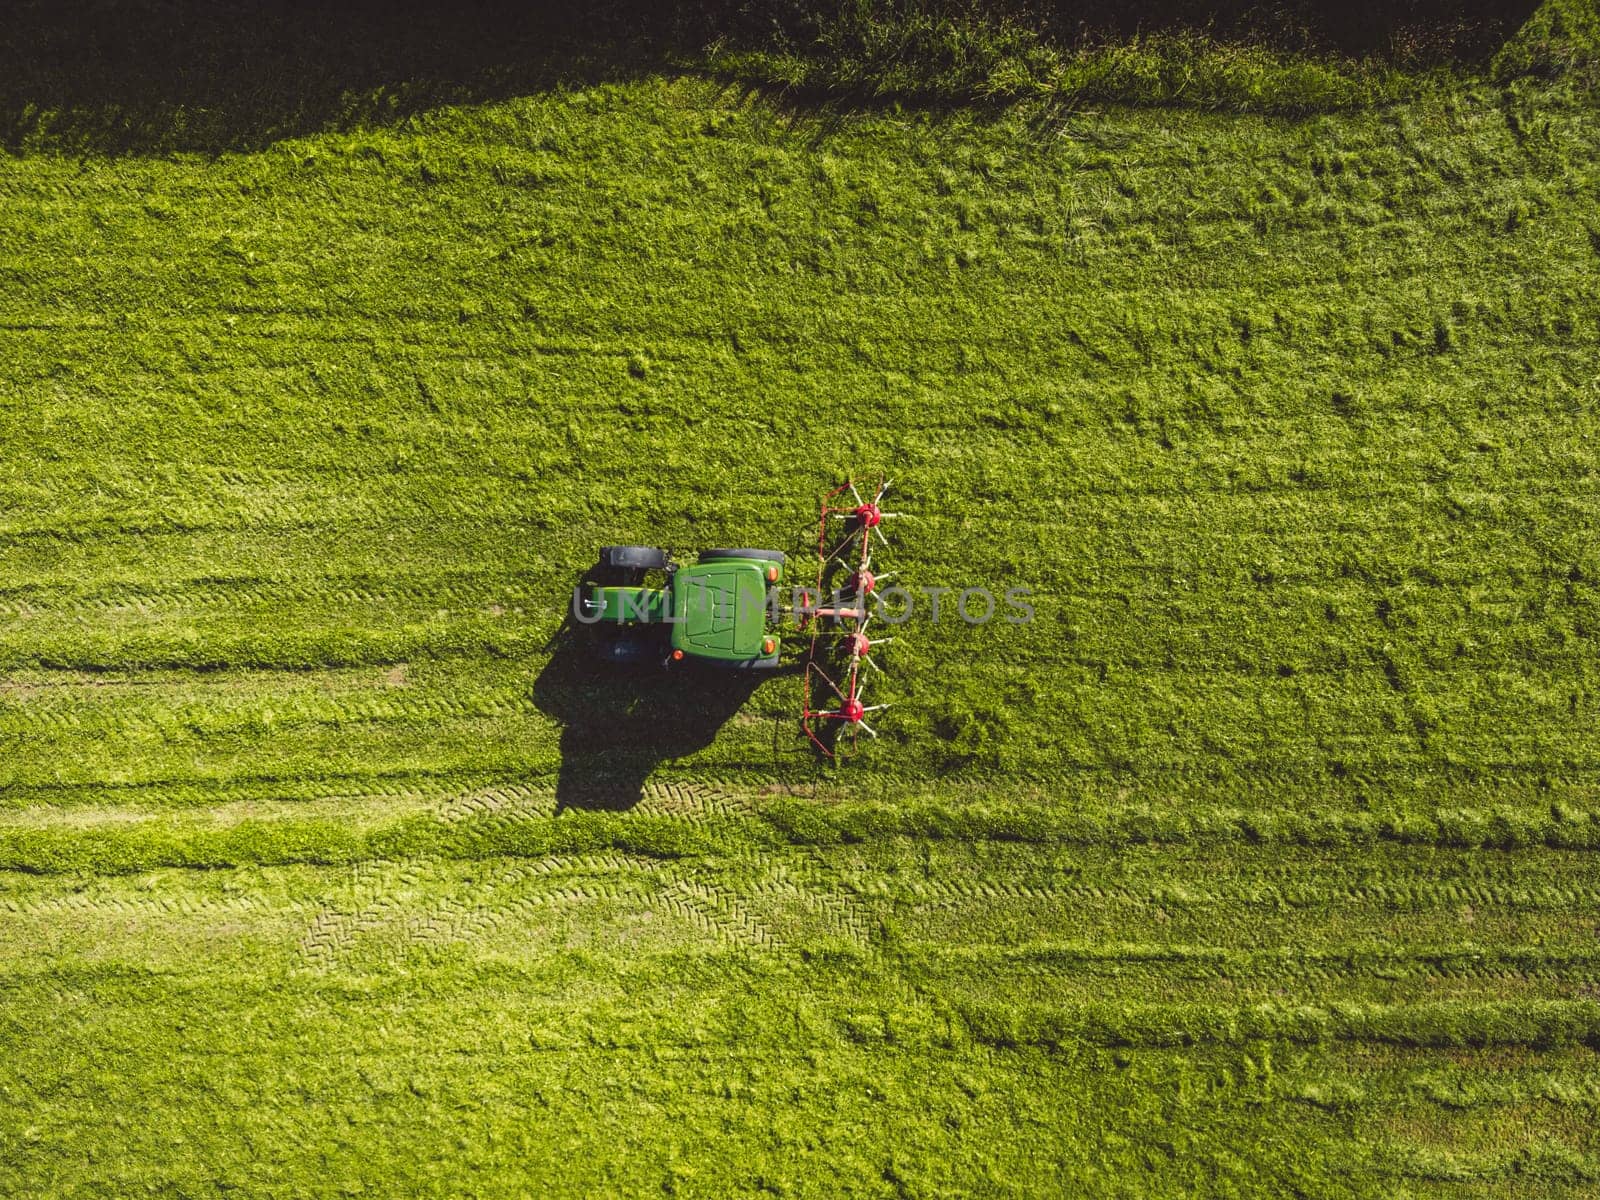 Top down view, directly above a tractor mowing a grass field by VisualProductions